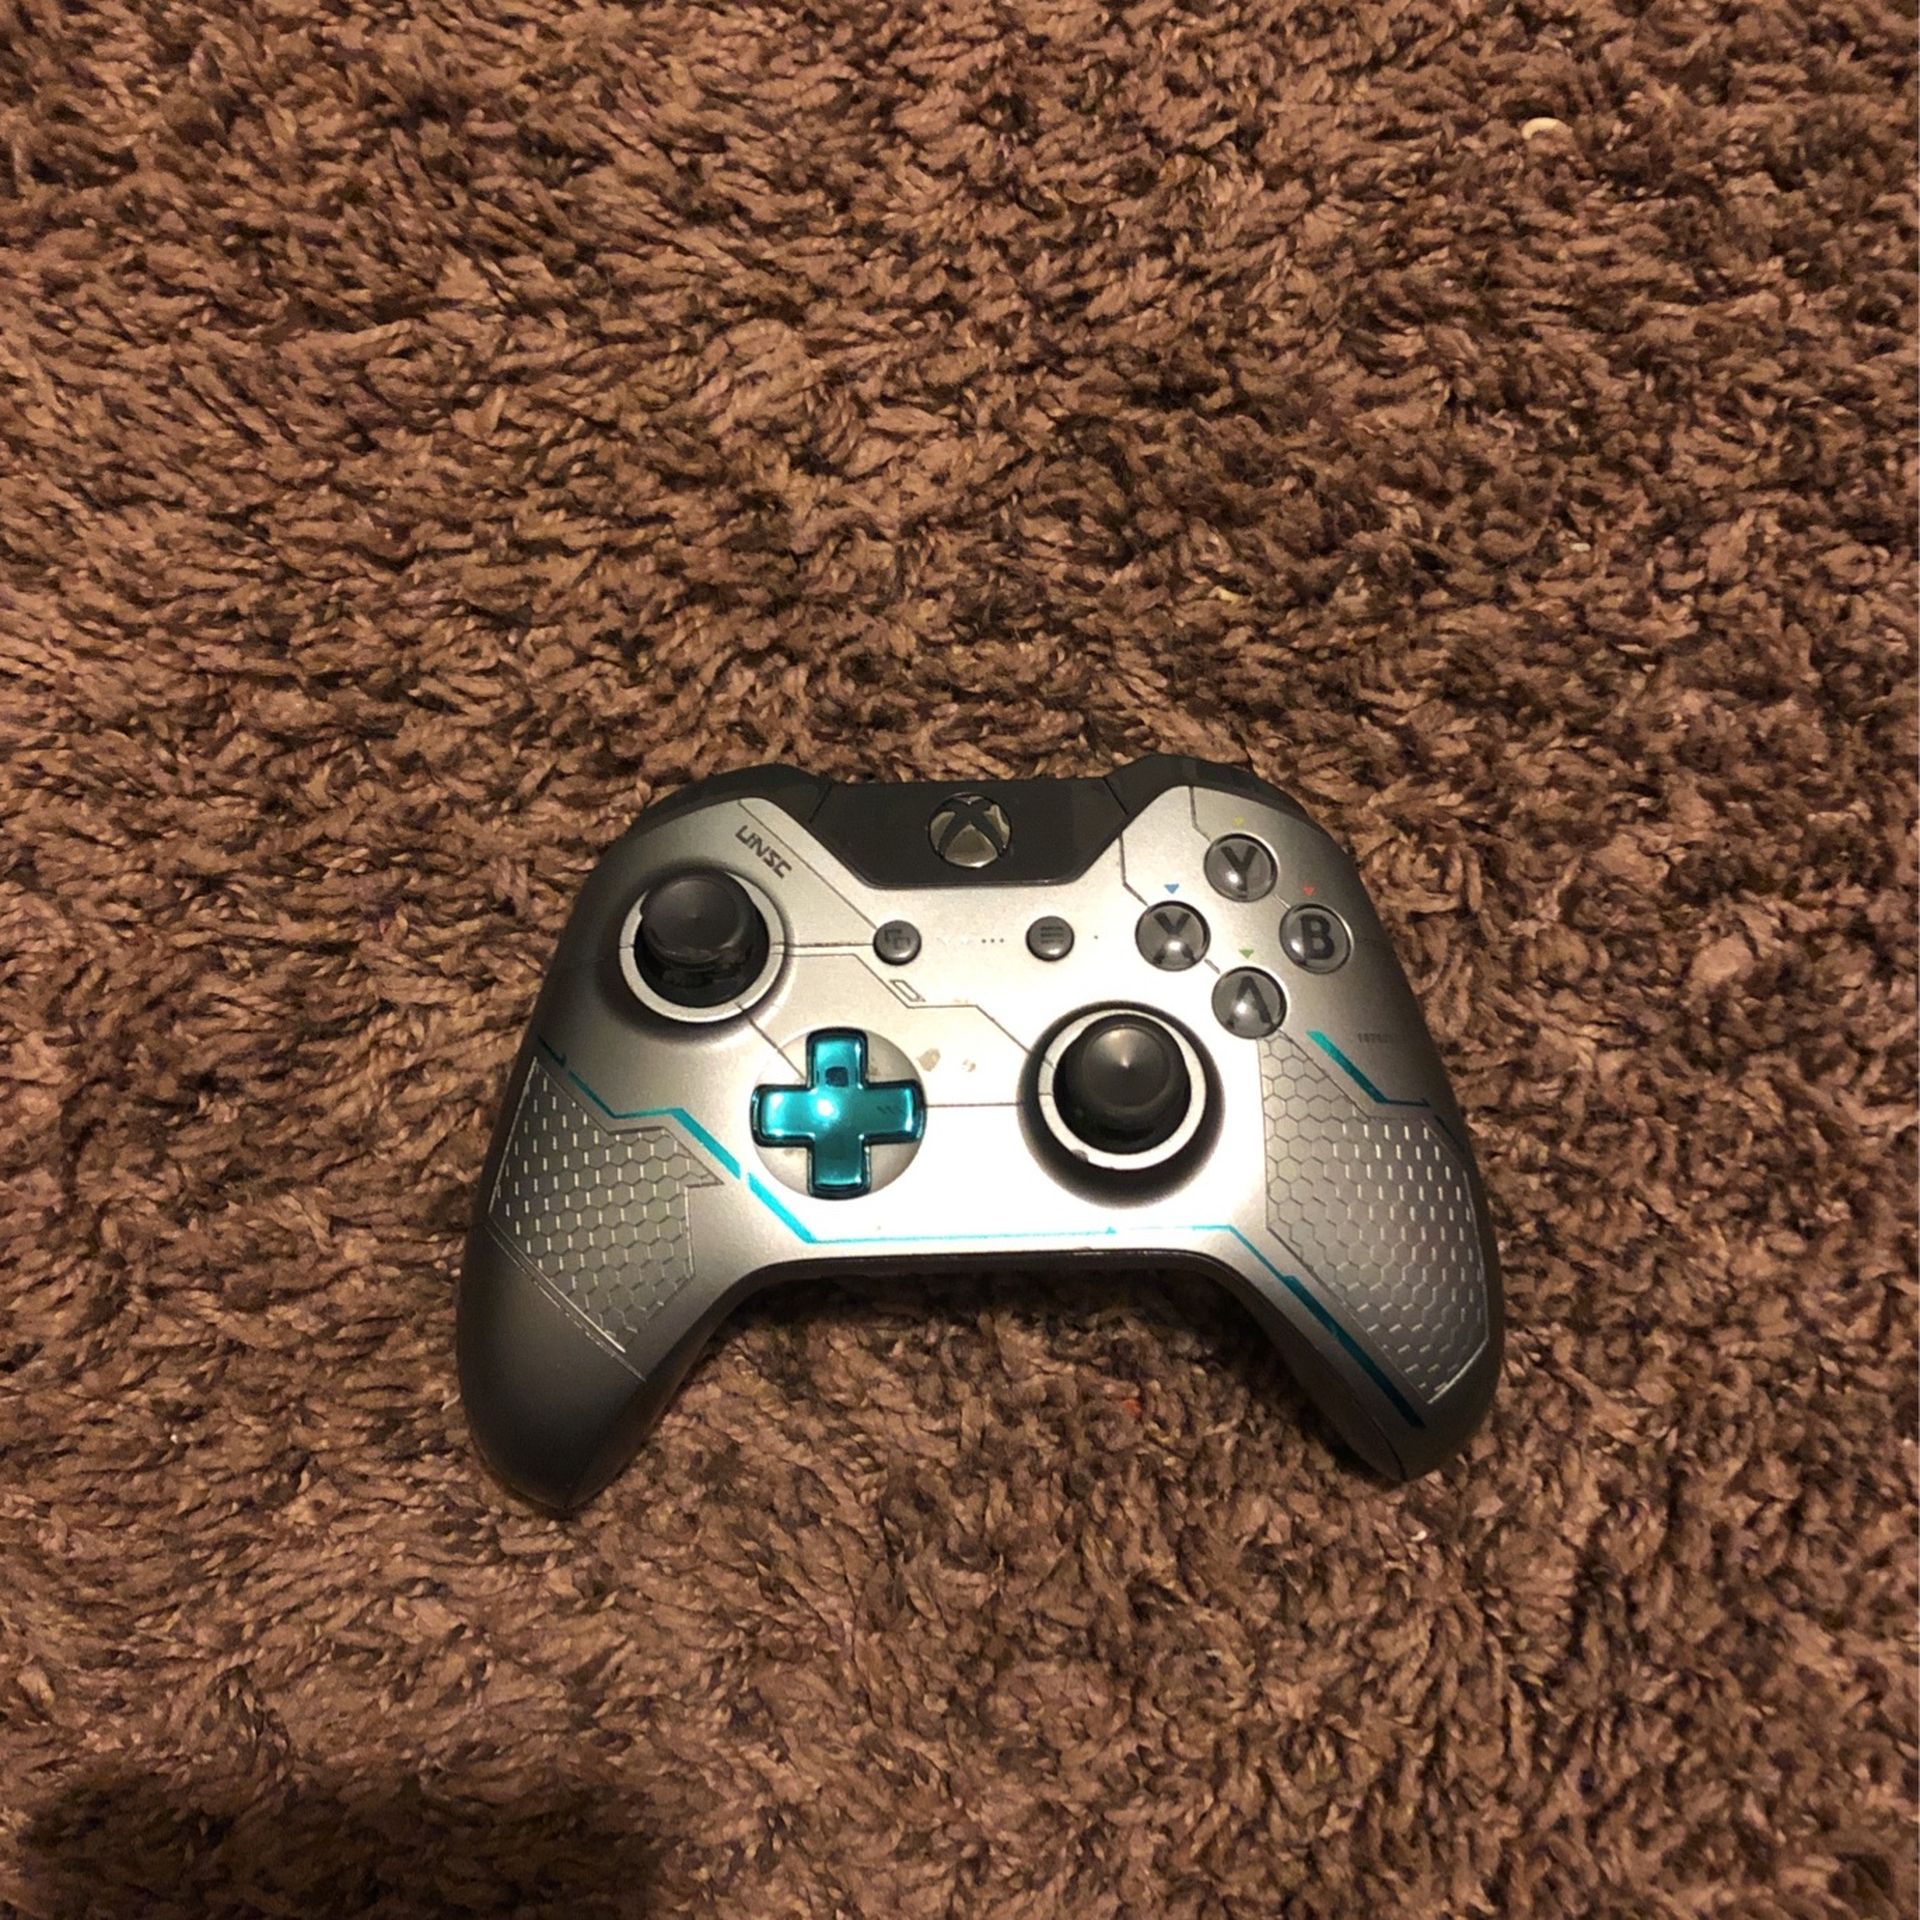 Halo 5 limited Edition Controller